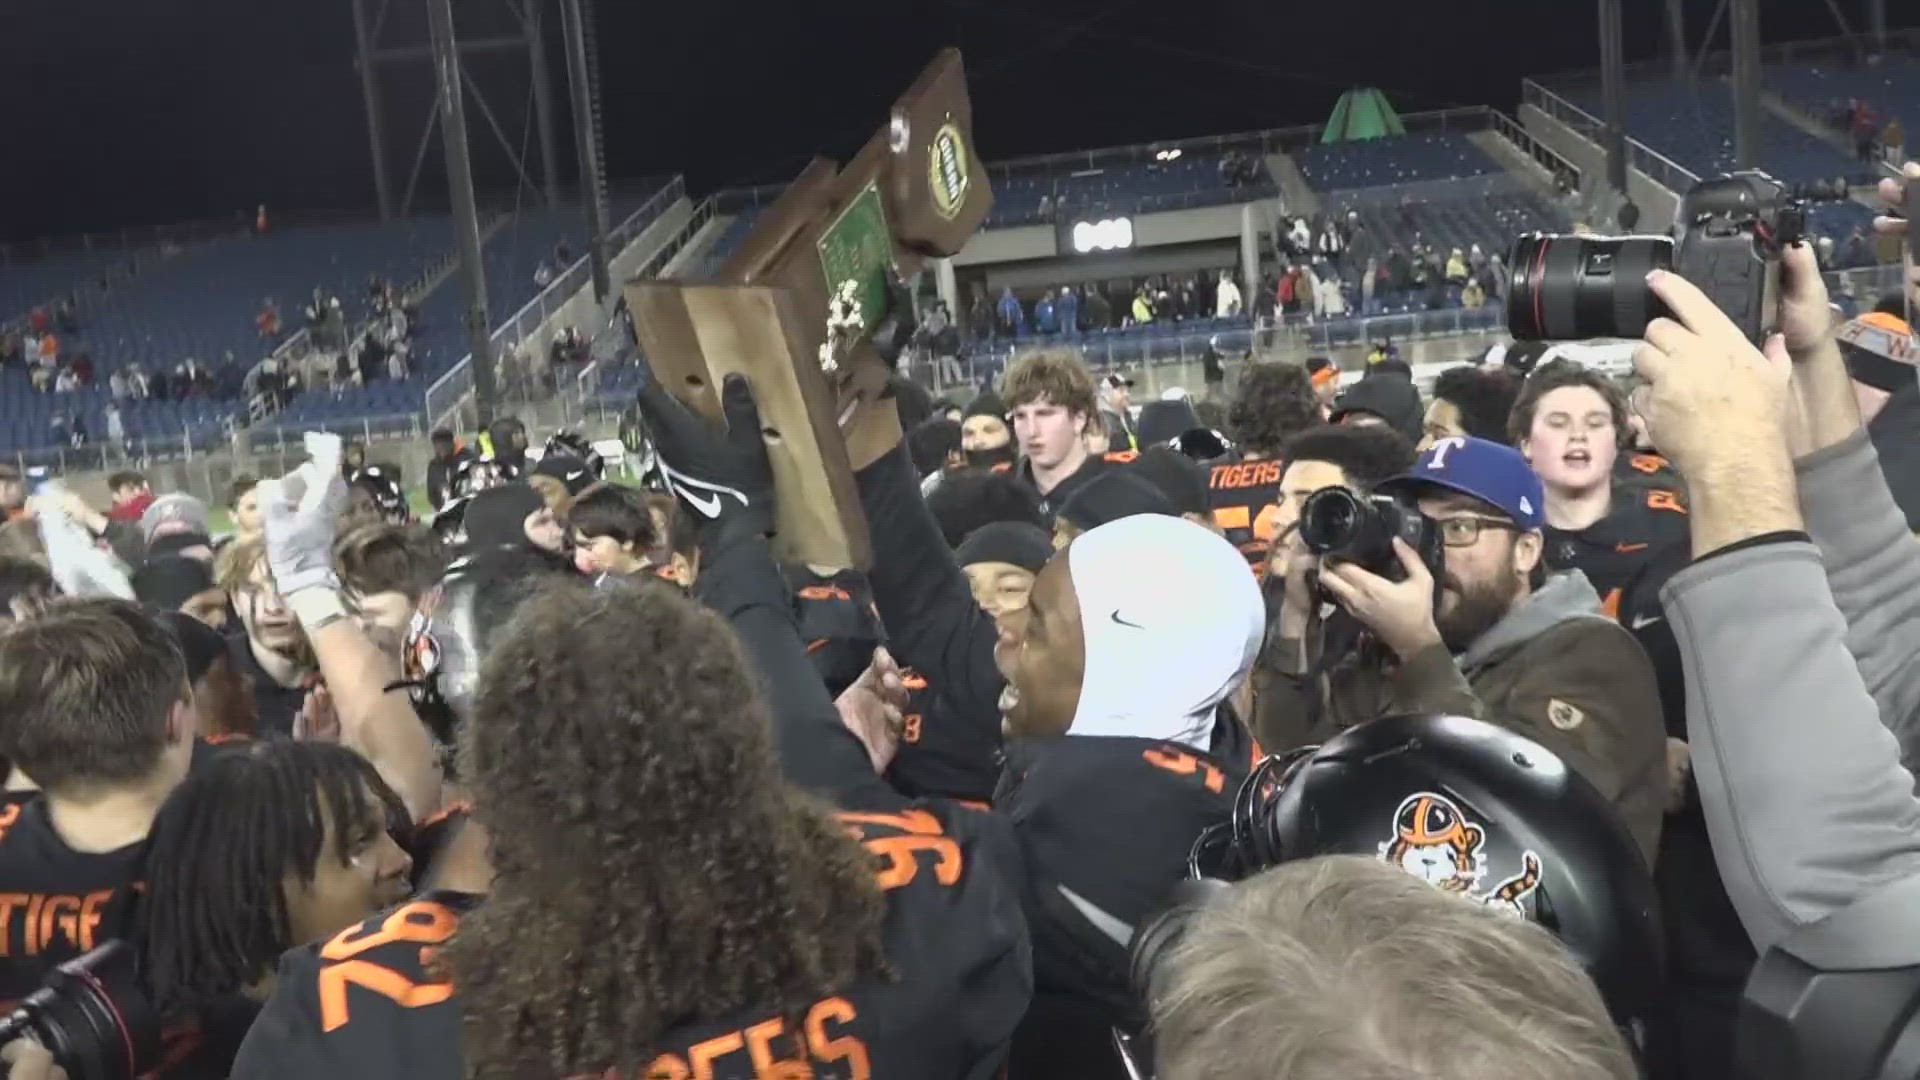 While it's the 25th state title for the Tigers, it's also the historic program's first since 1970 and first of the playoff era.